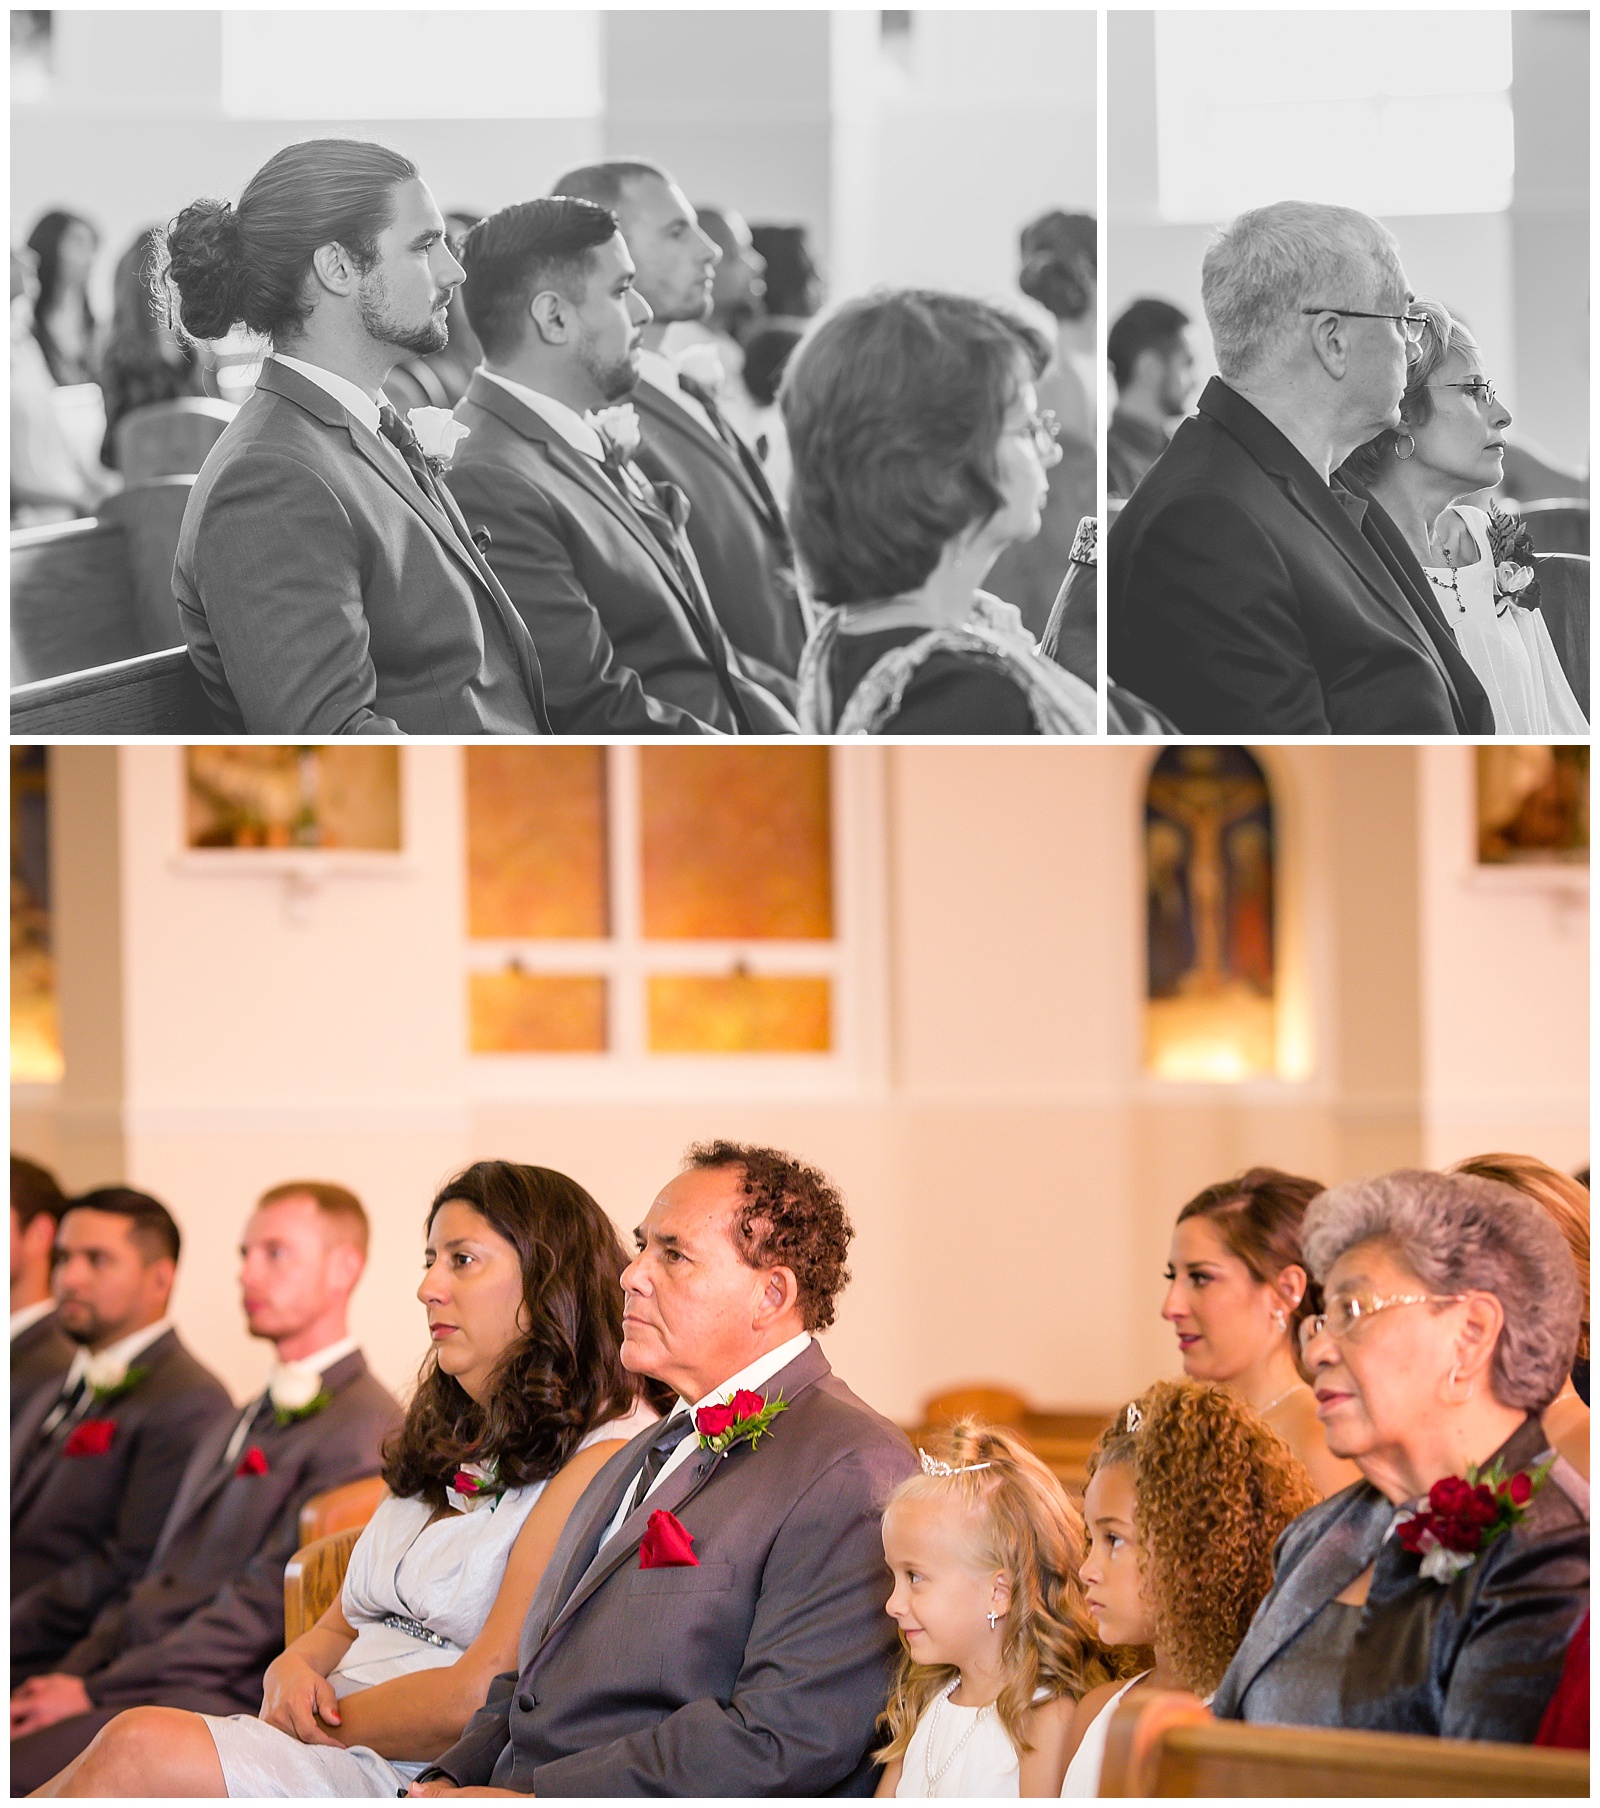 Wedding photography at Our Lady of Guadalupe Catholic Church in Topeka, Kansas.